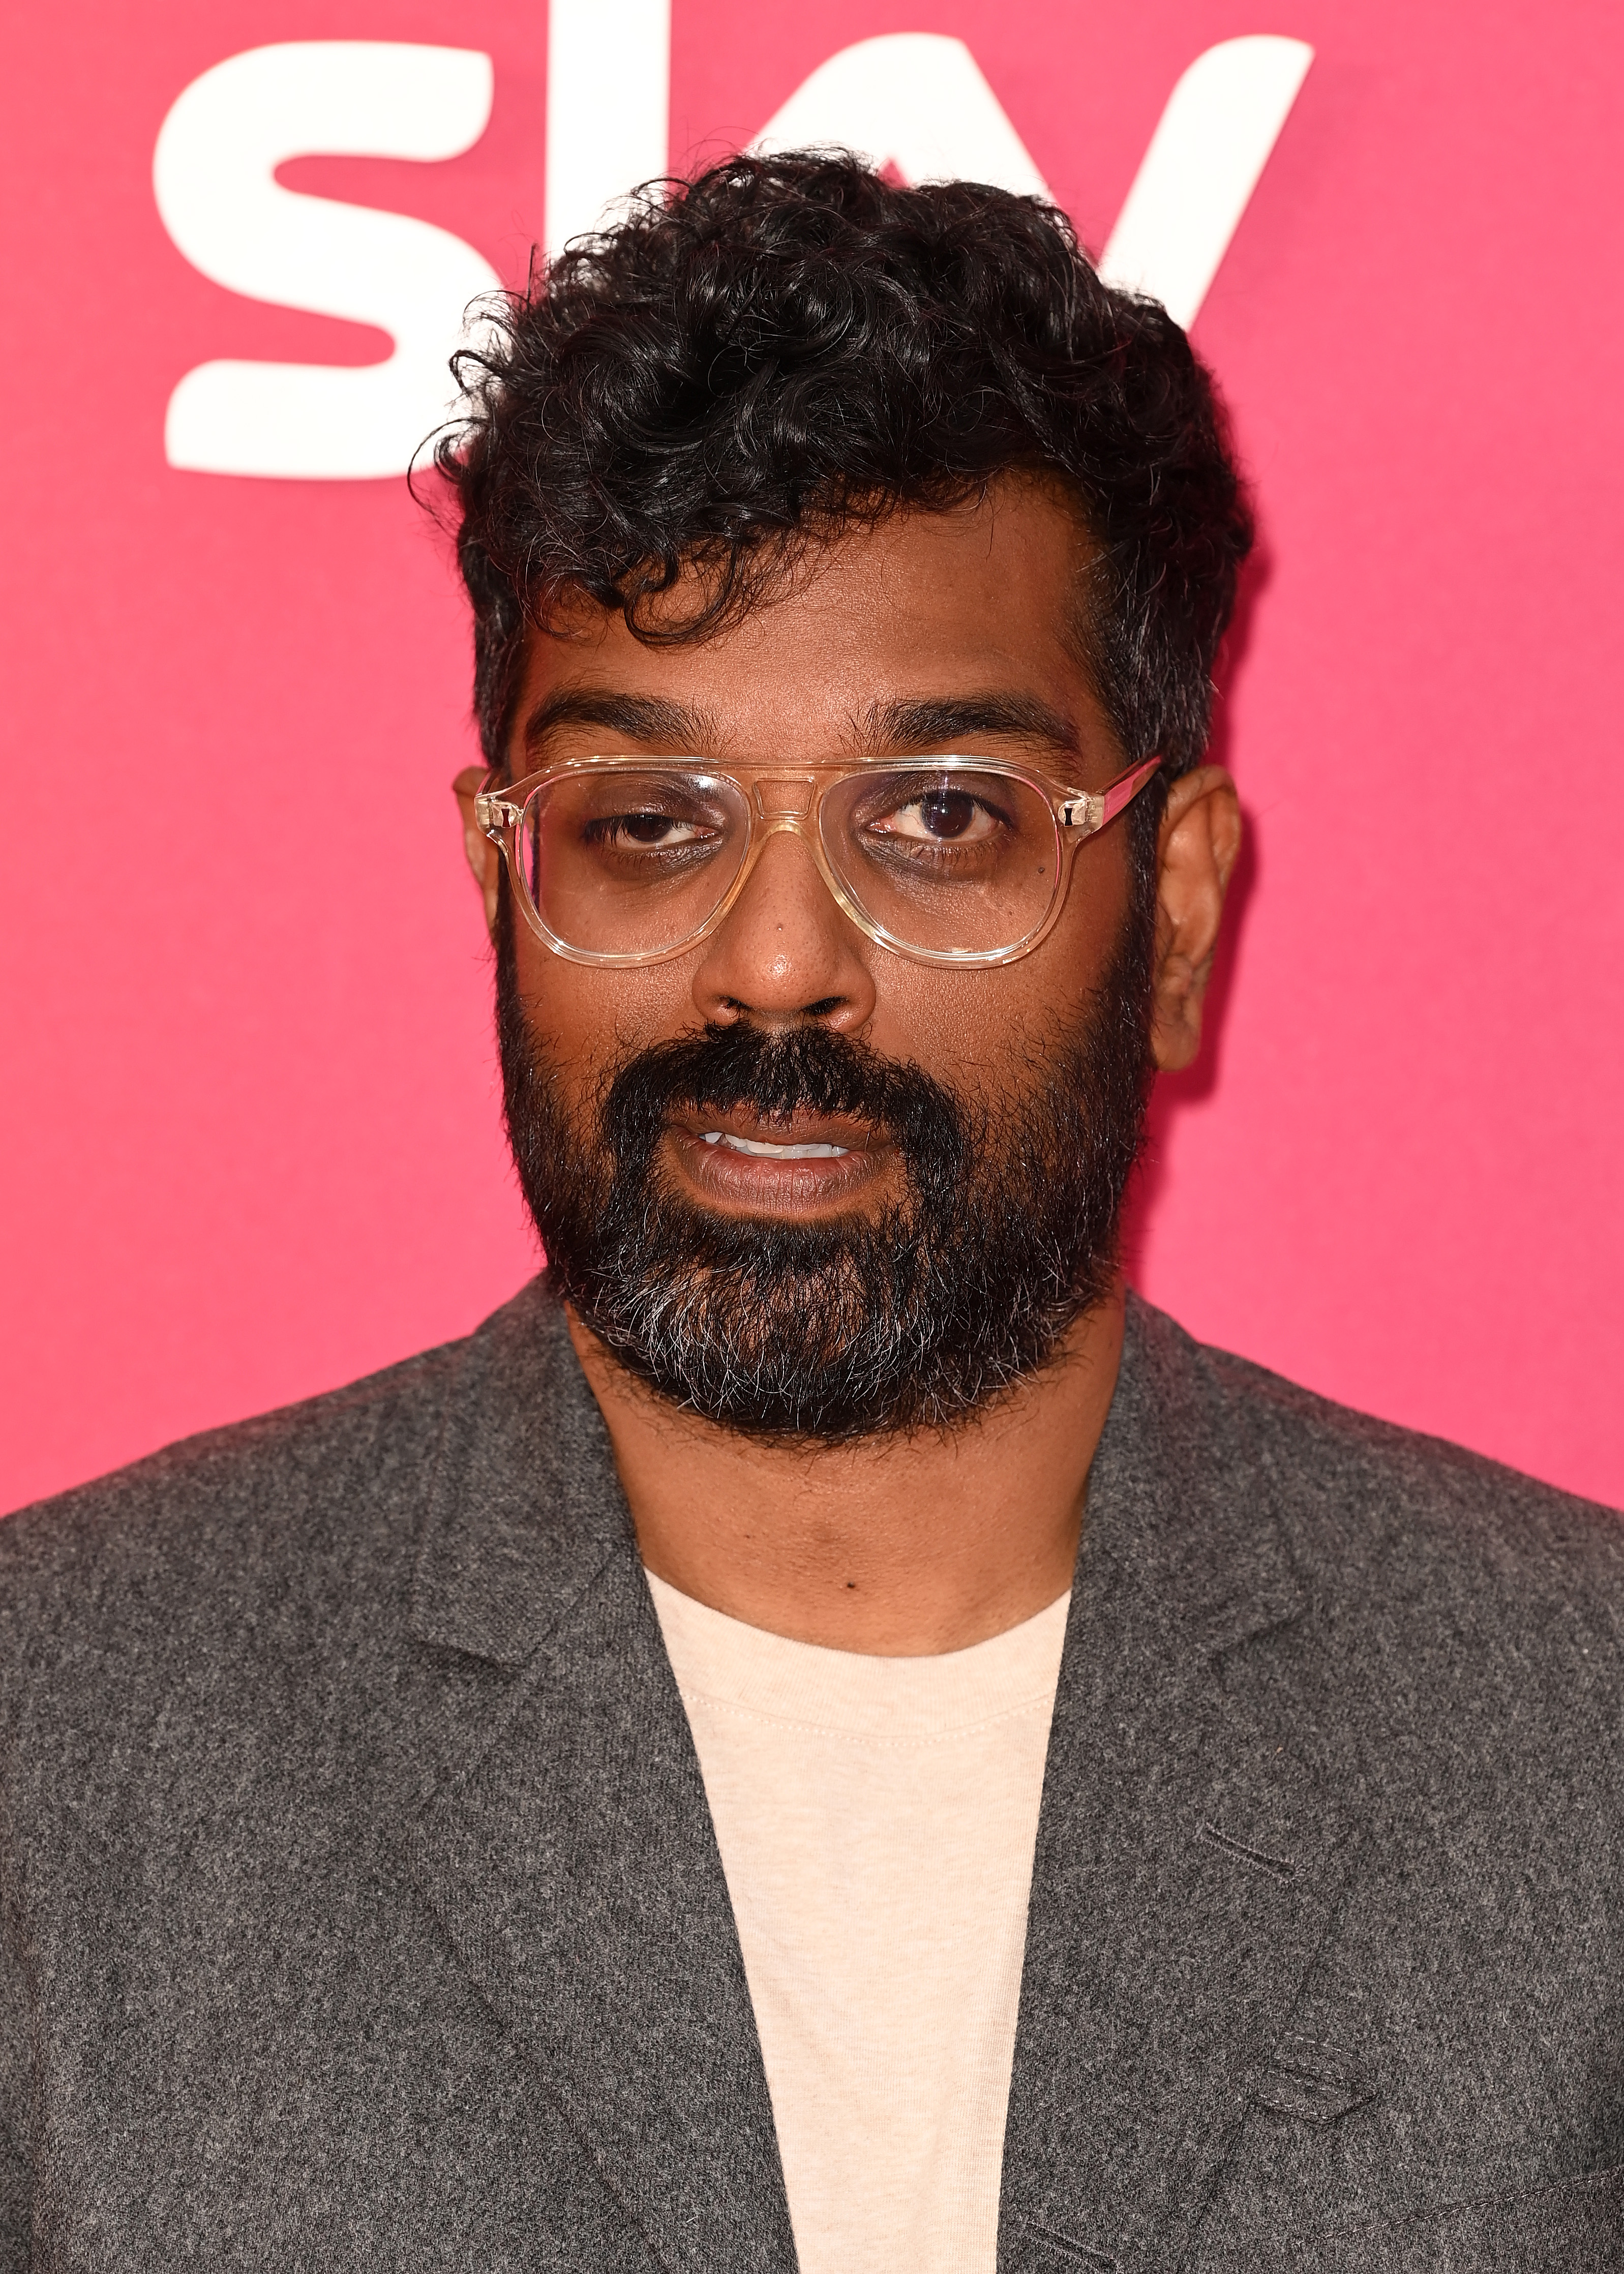 Romesh Ranganathan on May 17, 2022 in London, England | Source: Getty Images